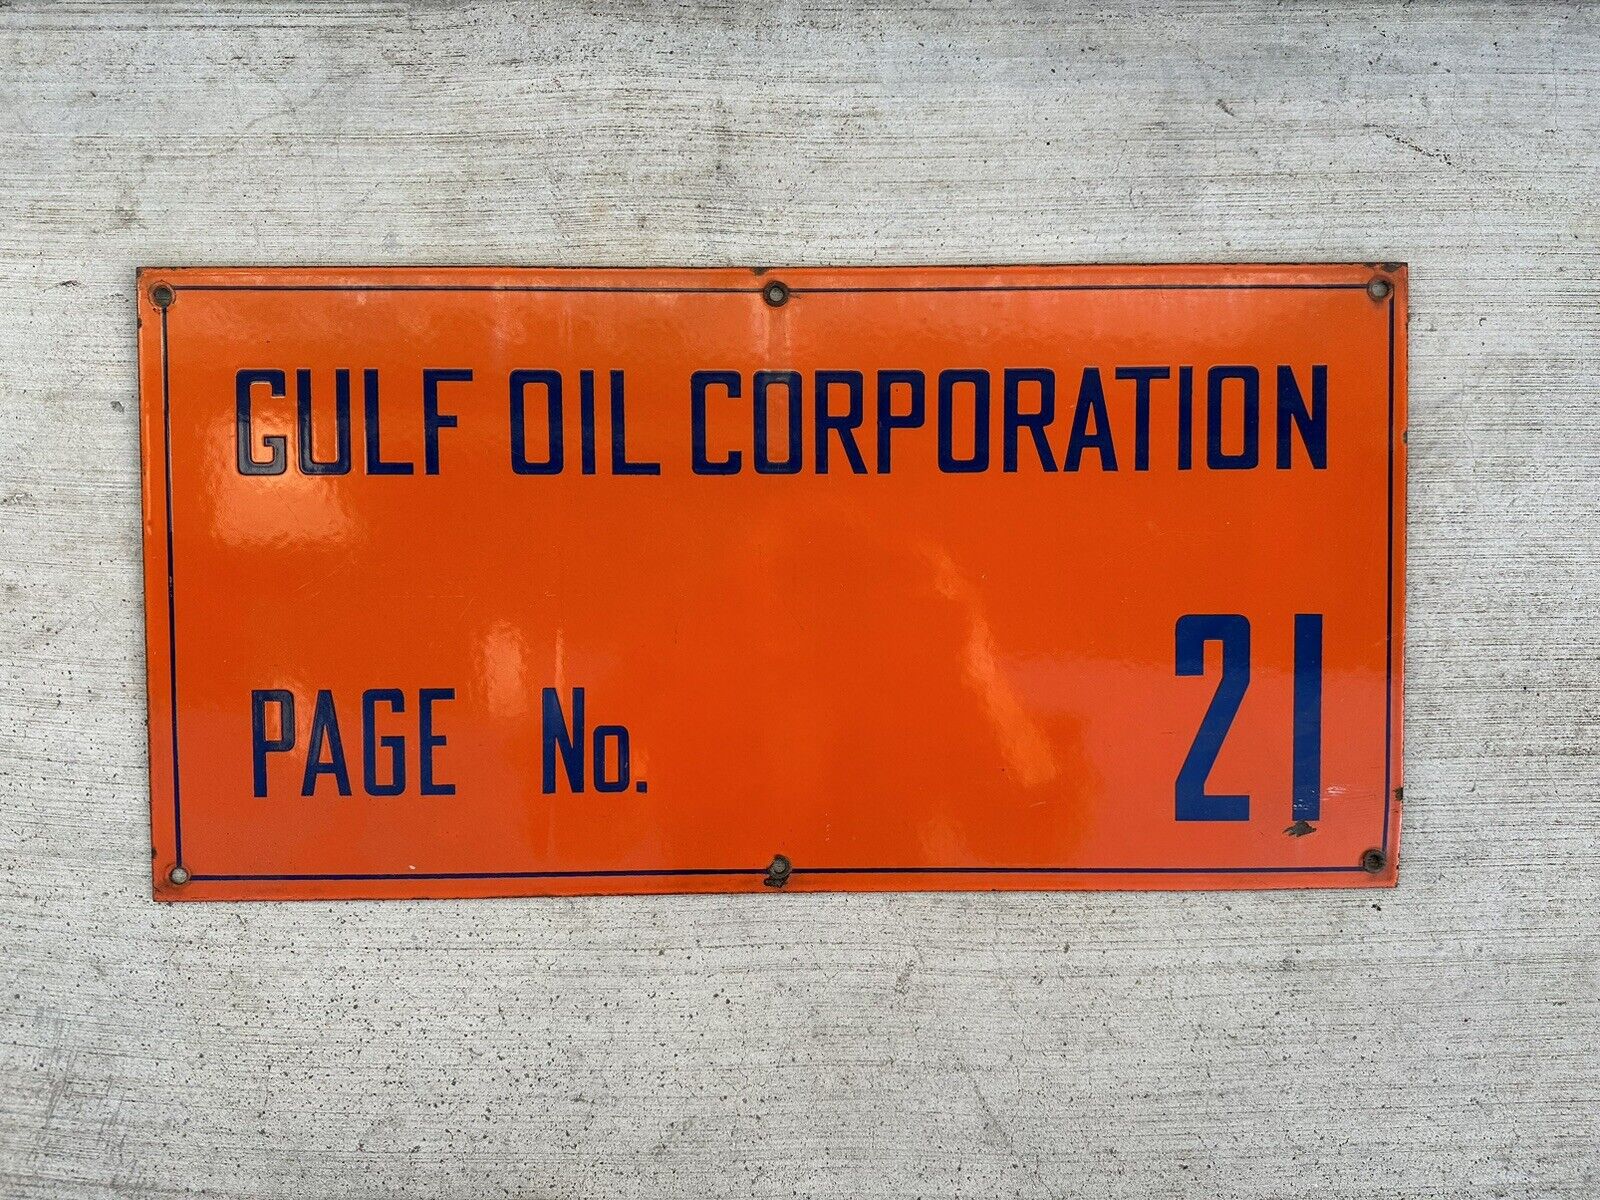 Single Sided Porcelain Gulf Oil Corporation Lease Sign